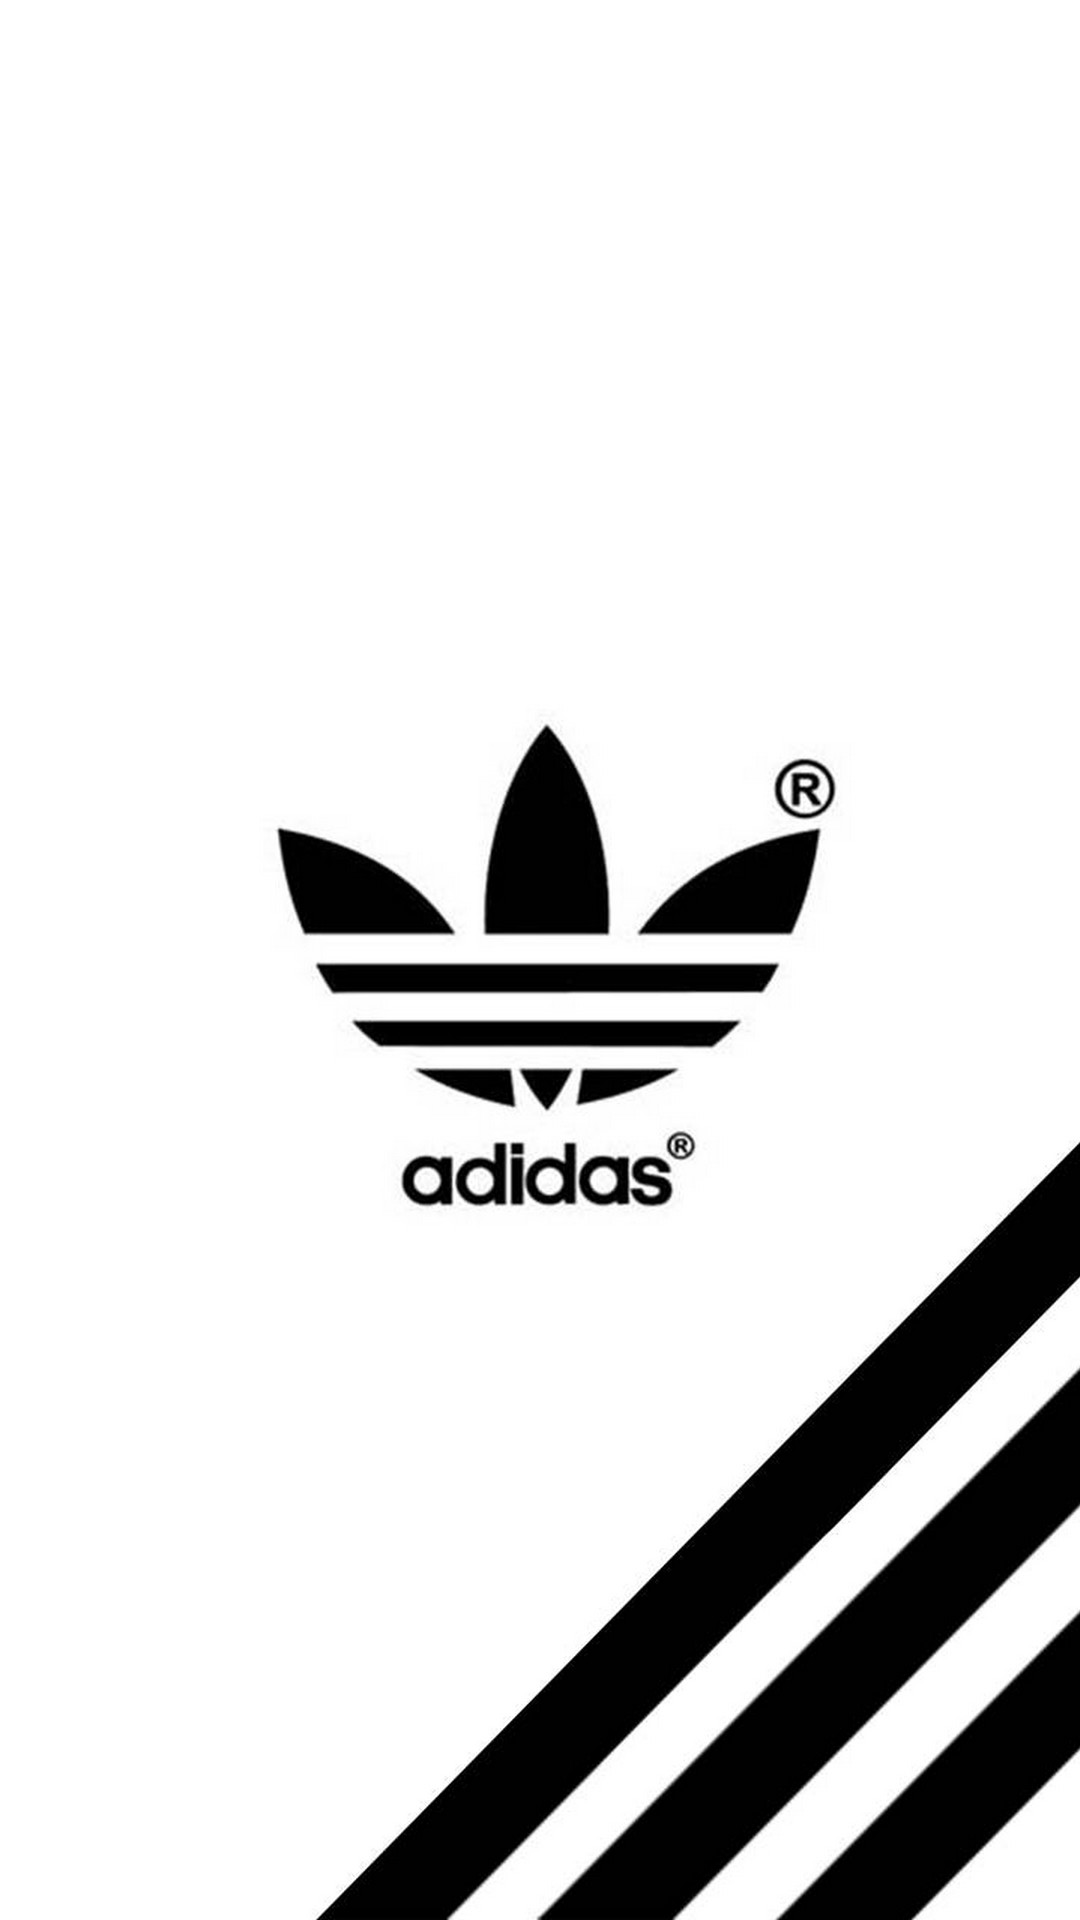 Adidas Logo Wallpaper For iPhone With high-resolution 1080X1920 pixel. You can use this wallpaper for your iPhone 5, 6, 7, 8, X, XS, XR backgrounds, Mobile Screensaver, or iPad Lock Screen